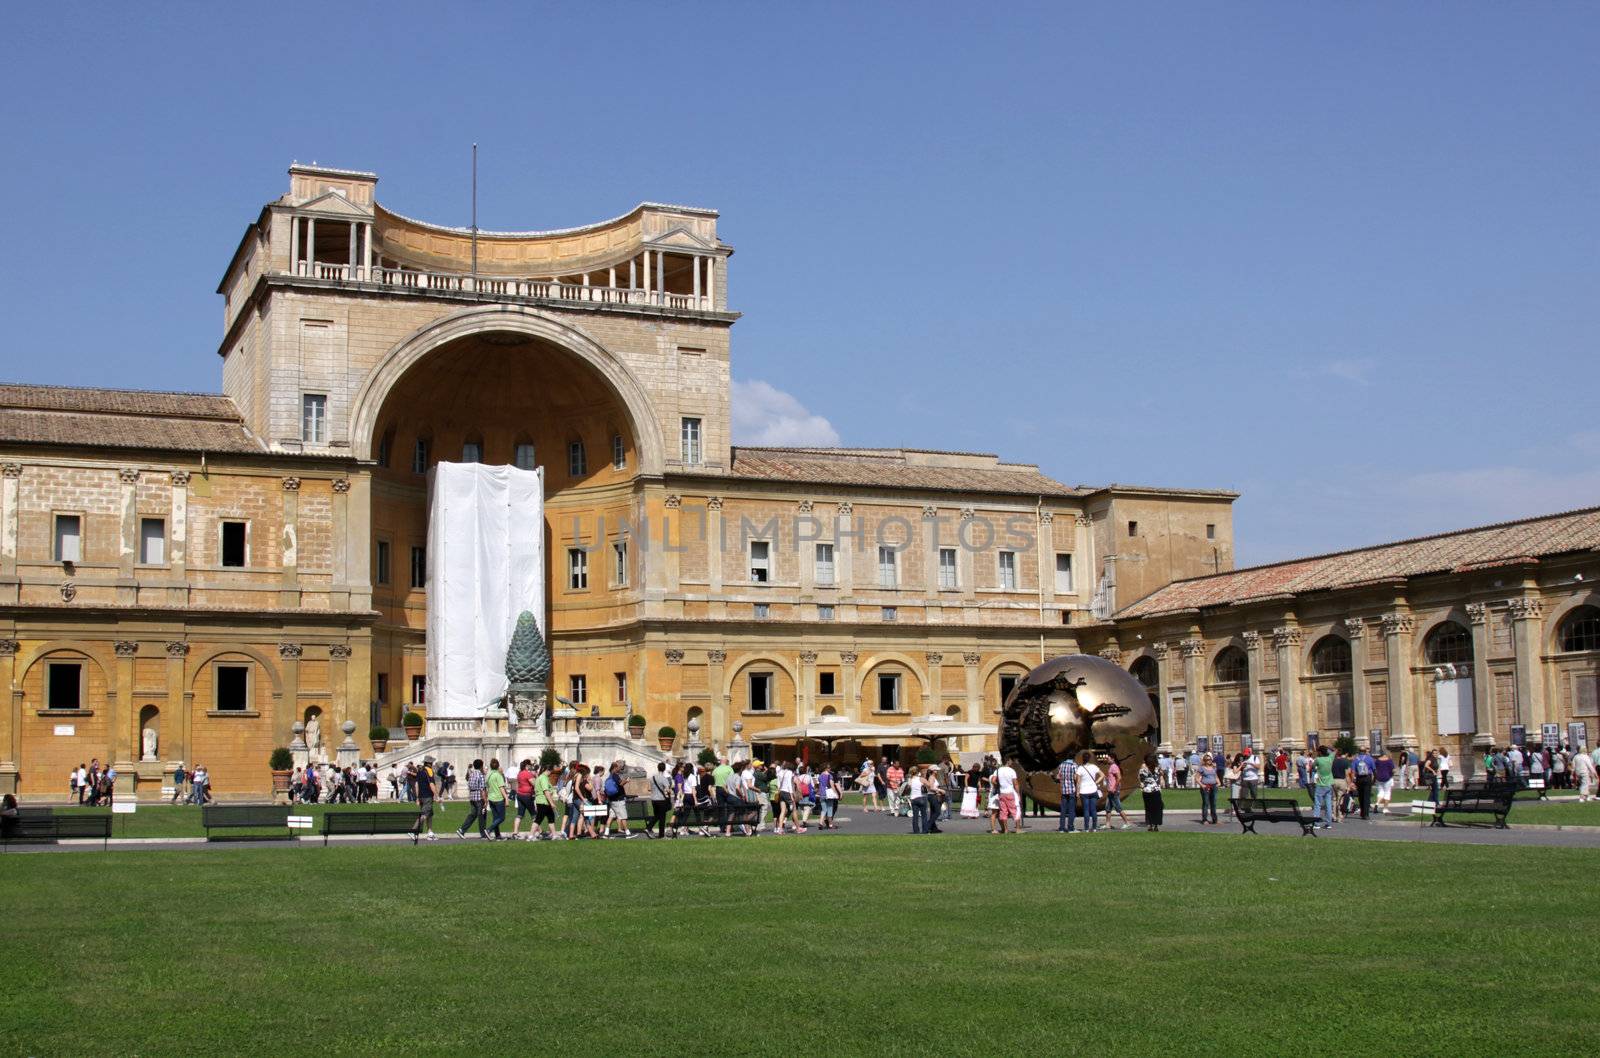 Courtyard of the Vatican Museums by ca2hill